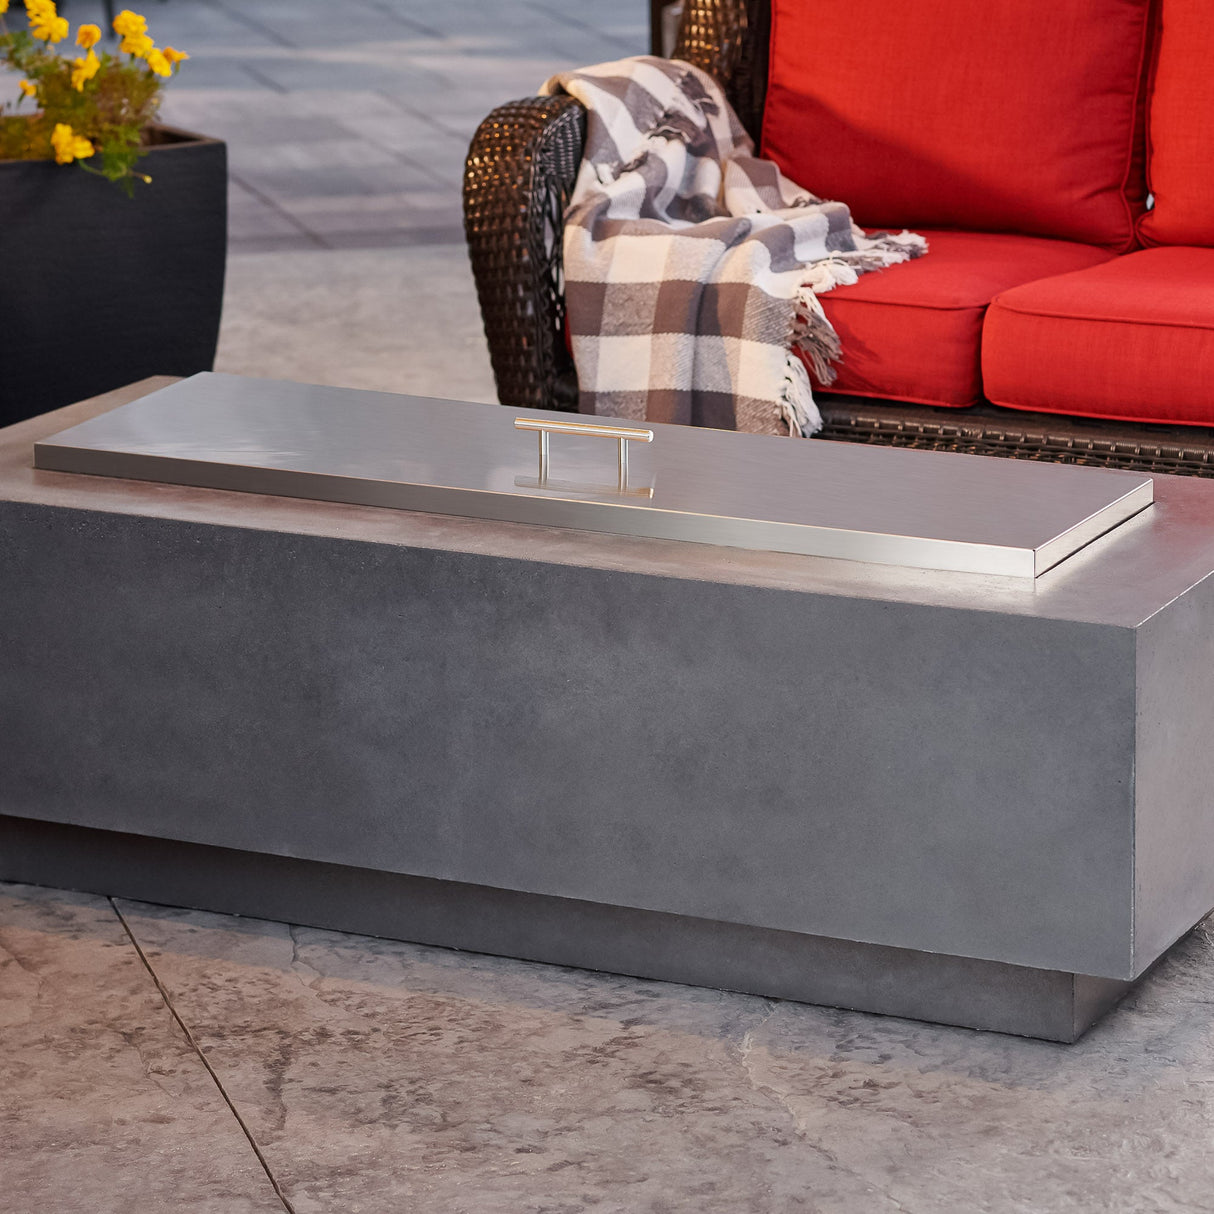 A Stainless Steel Burner Cover placed on top of the Midnight Mist Cove Linear Gas Fire Pit Table 54"